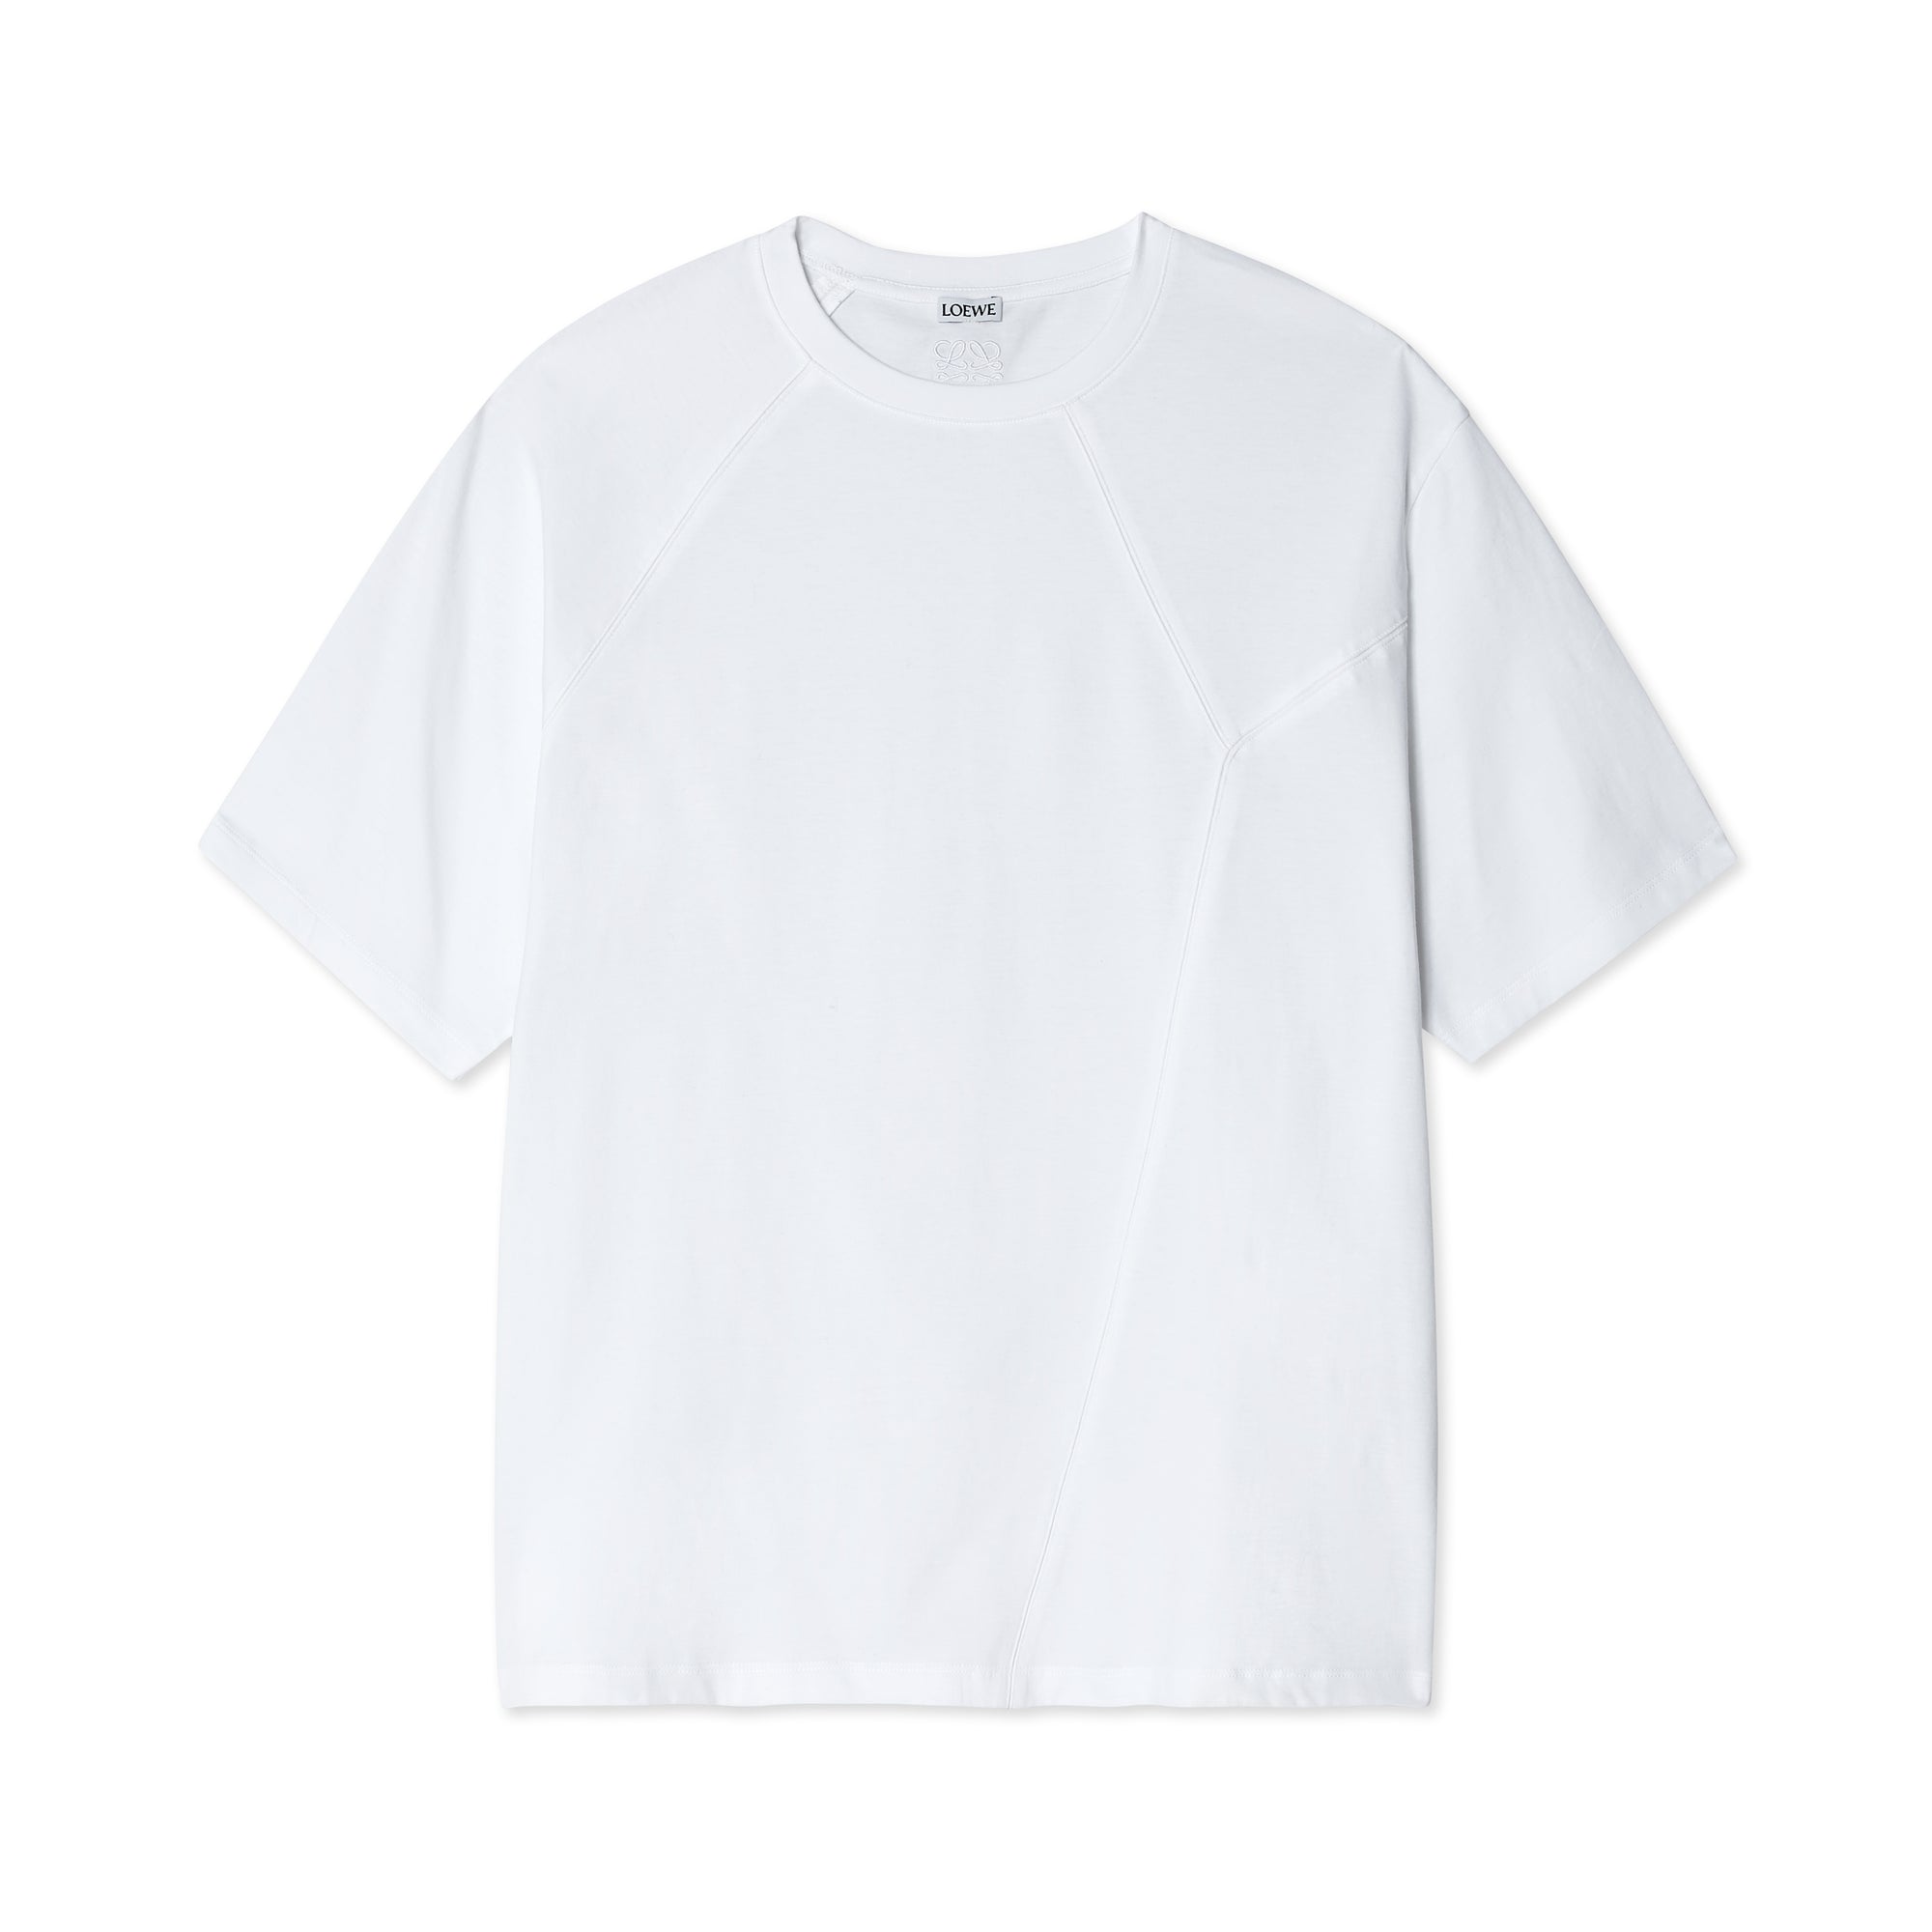 Loewe Relaxed Fit T-Shirt